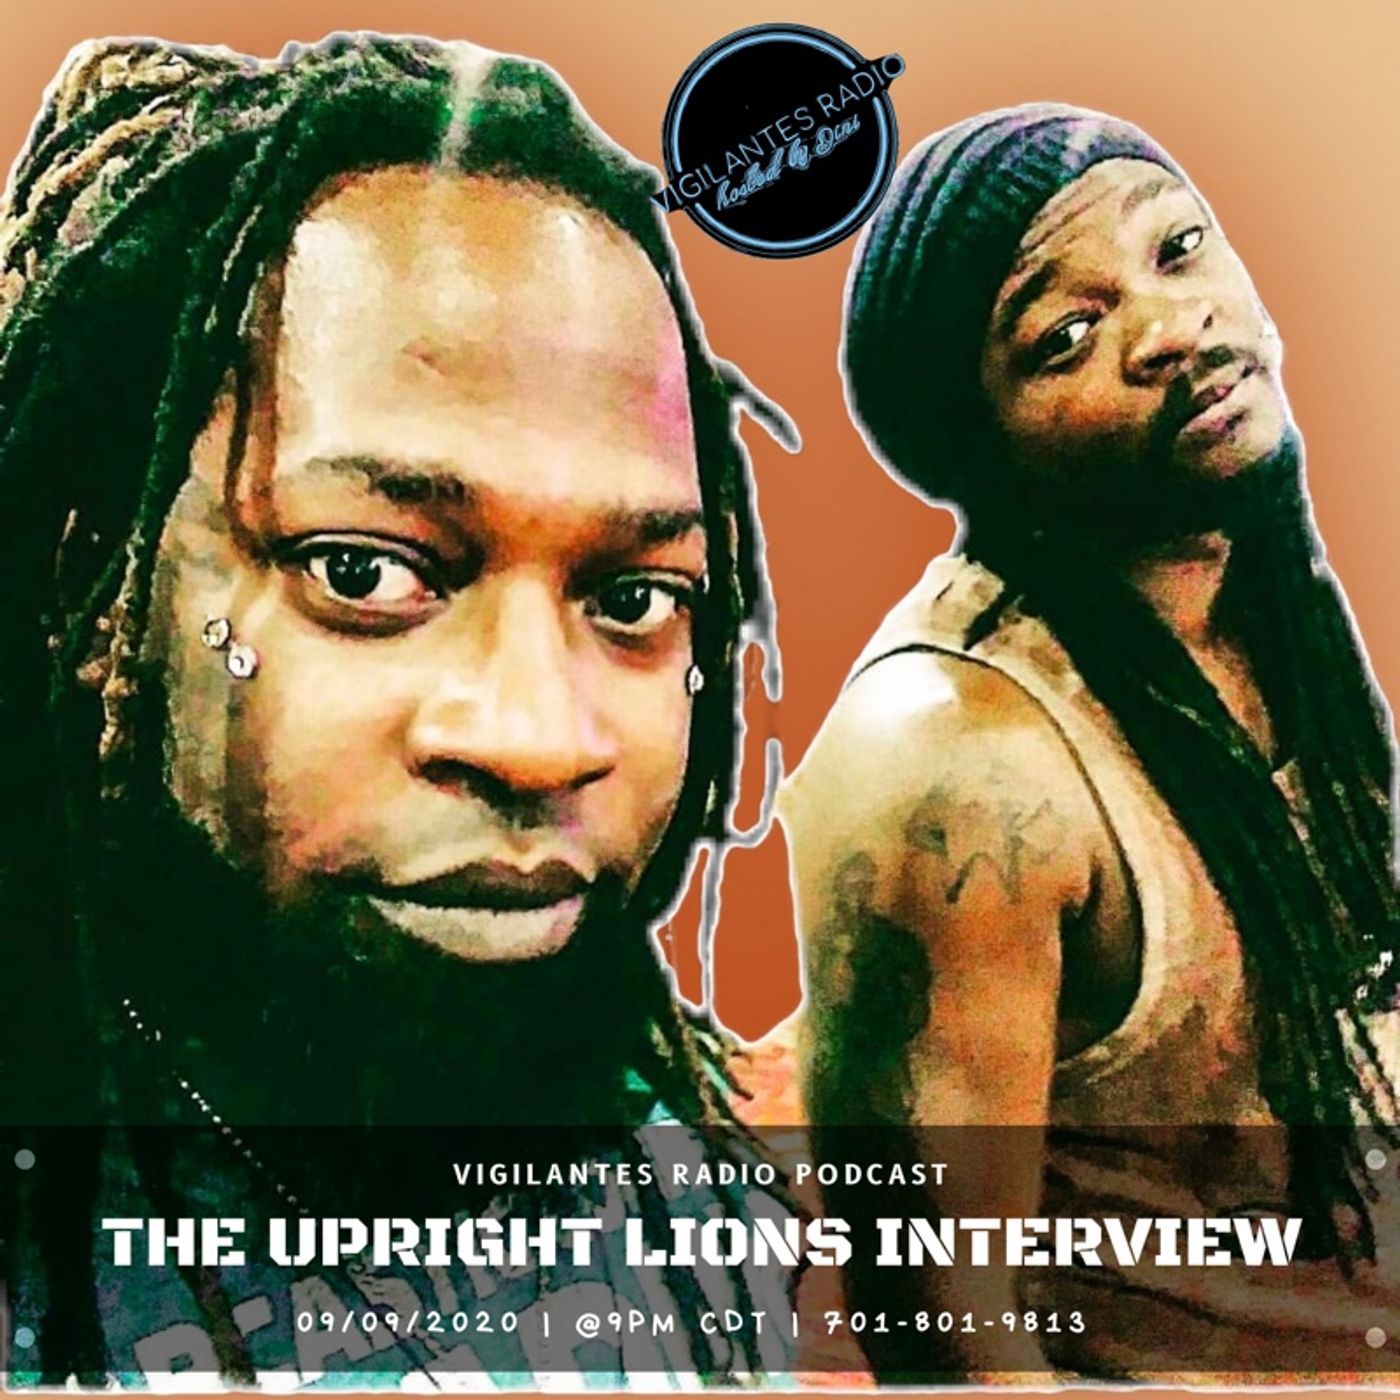 The Uprite Lions Interview. Image